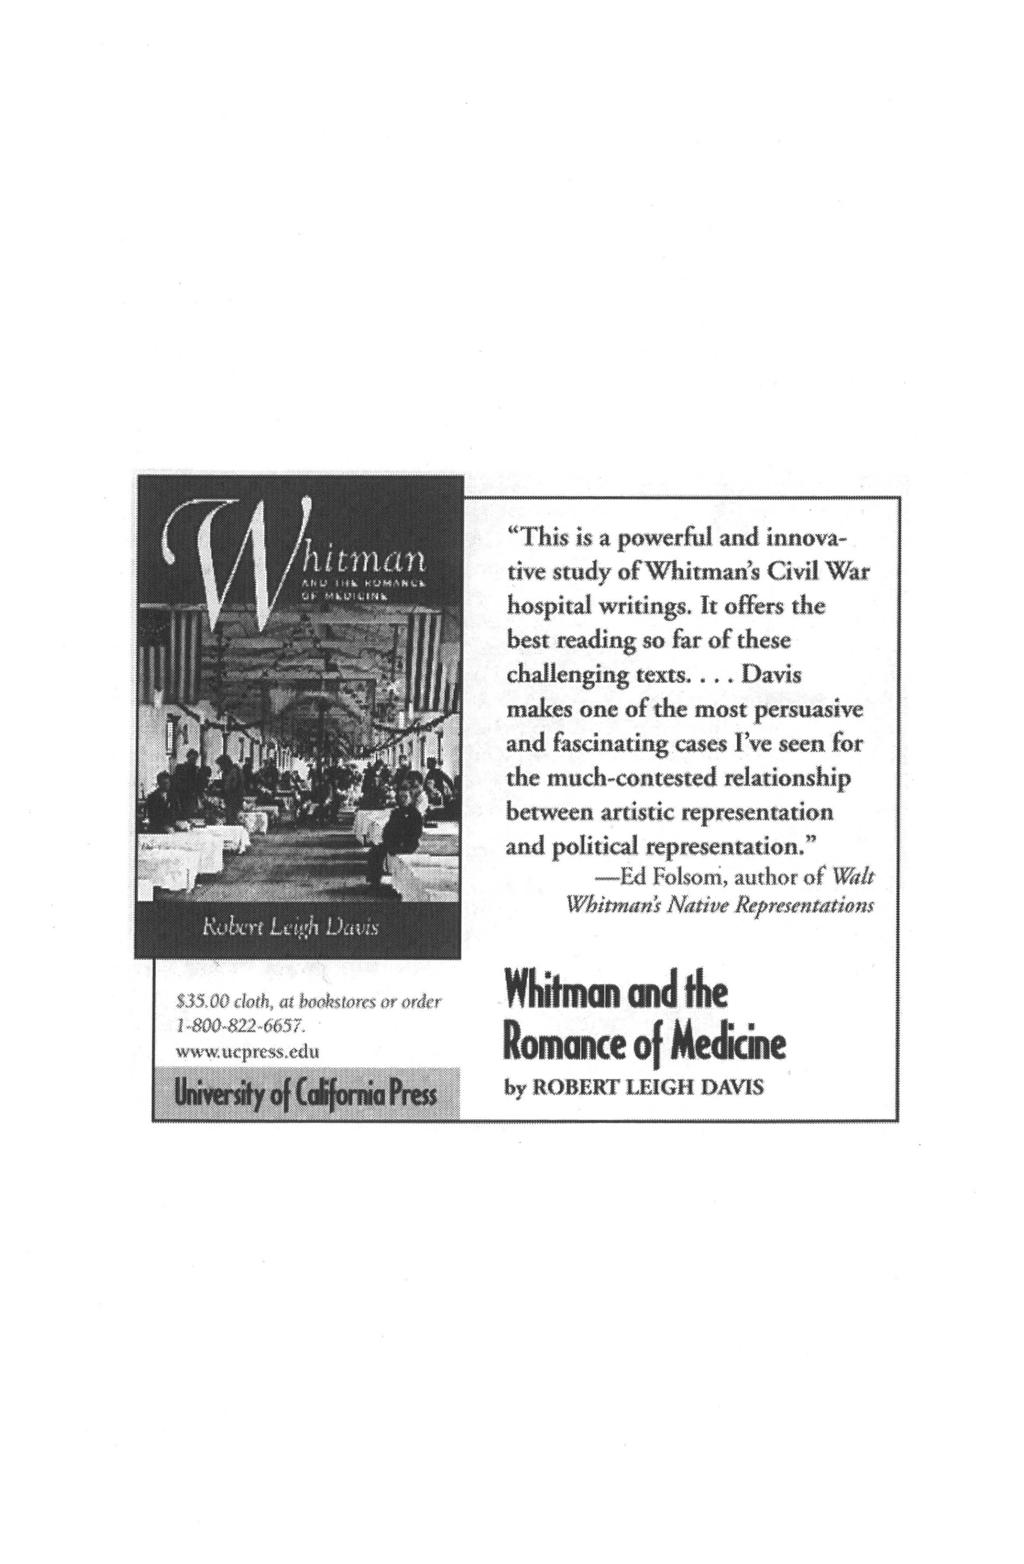 "This is a powerful and innovative study of Whitman's Civil War hospital writings. It offers the best reading so far of these challenging texts... Davis makes one of the most persuasive and fasclnating.